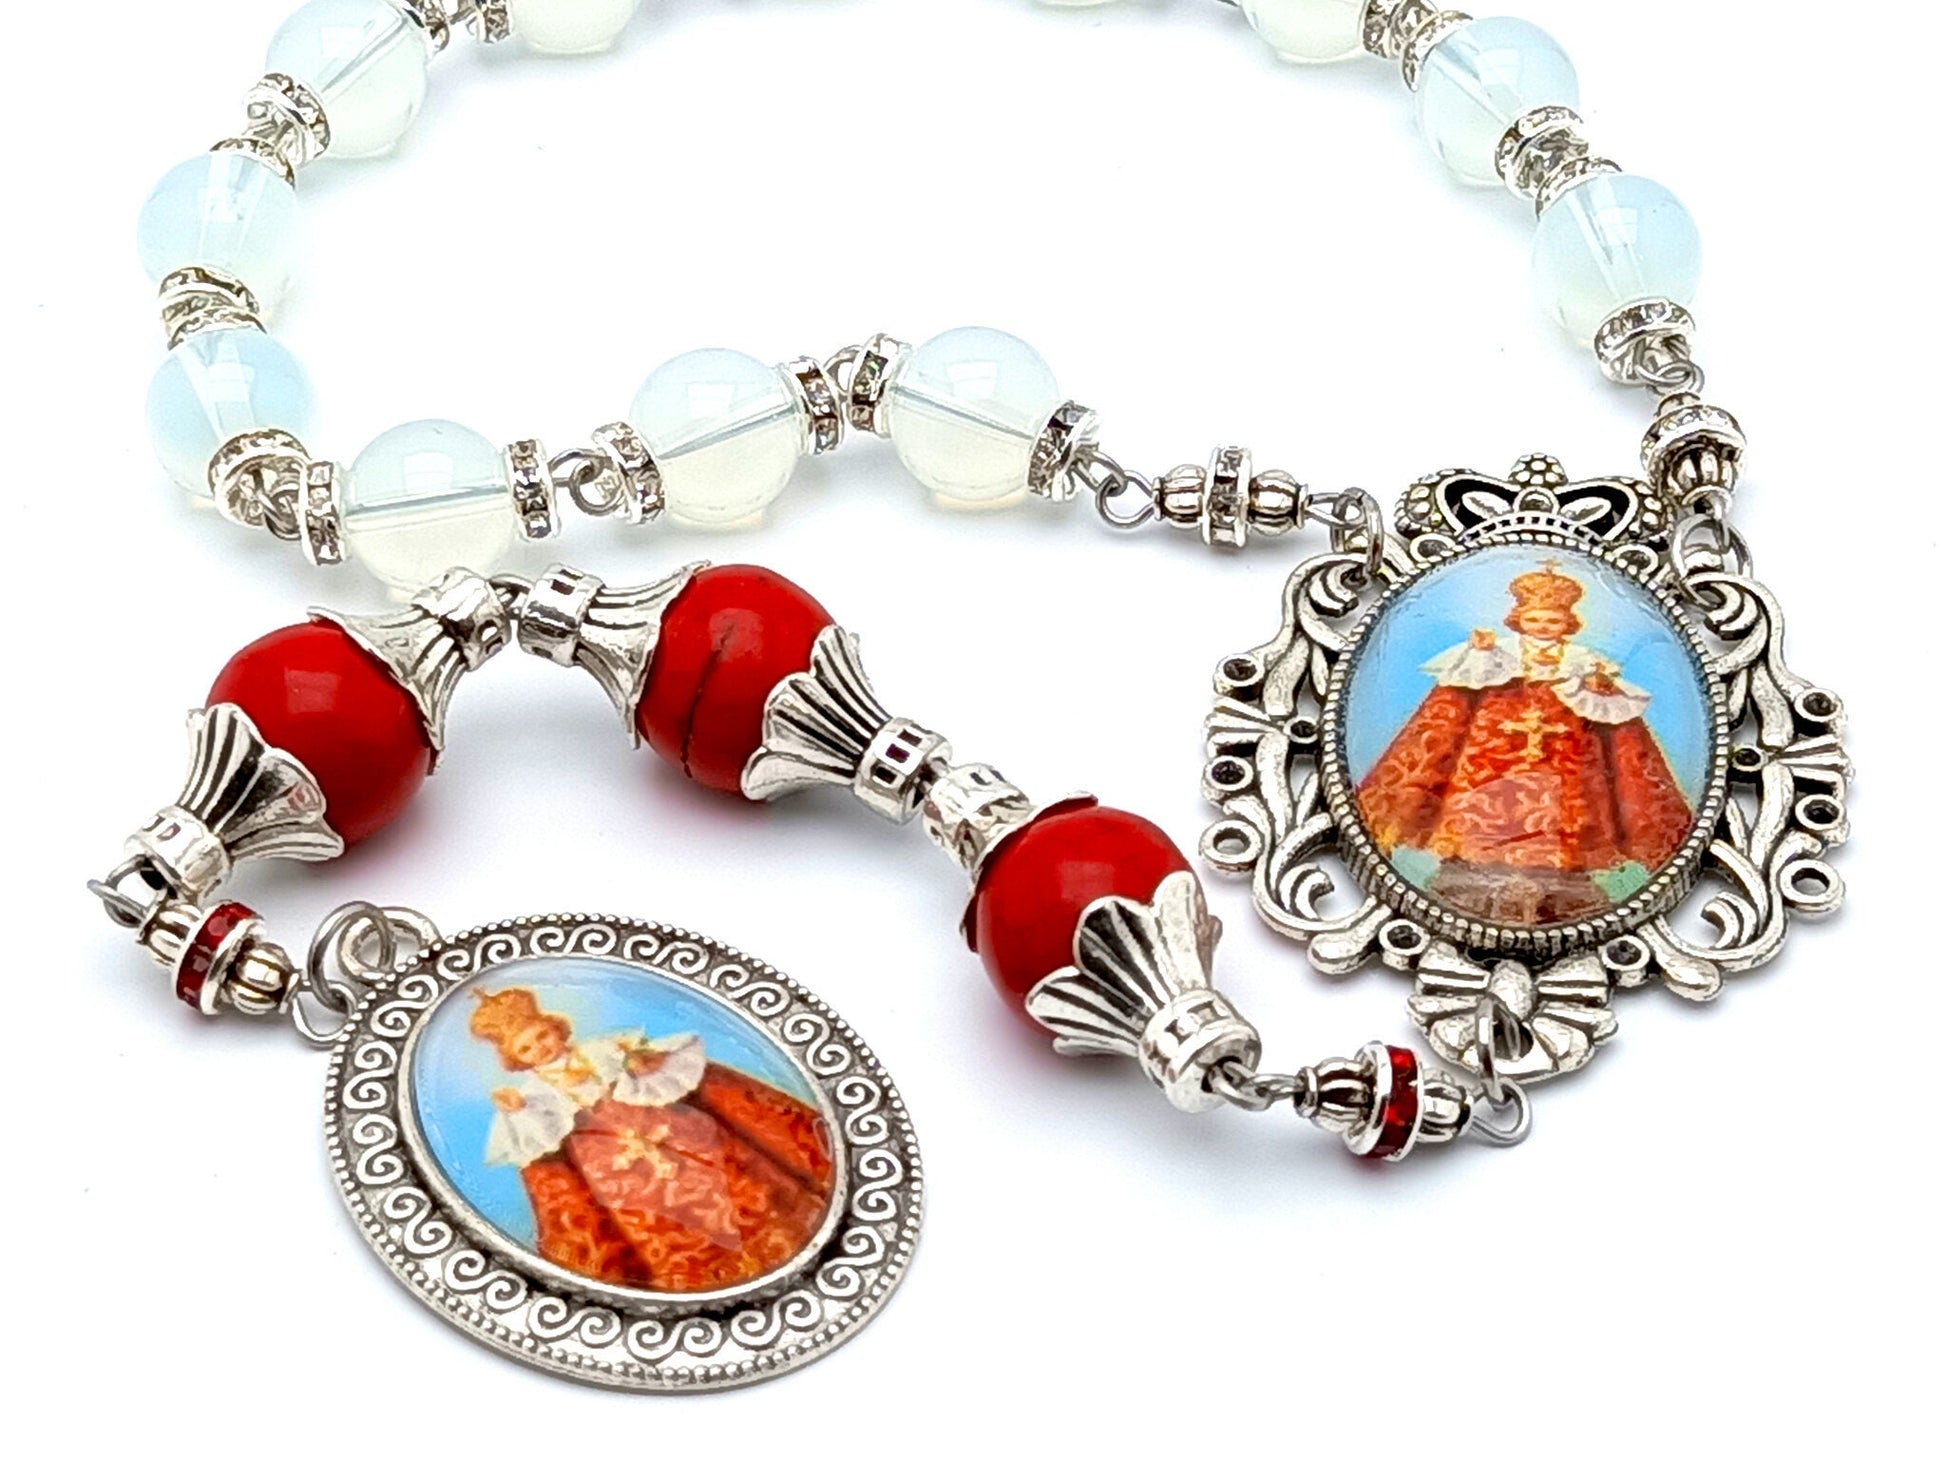 Infant of Prague unique rosary beads prayer chaplet with opal and red gemstone beads, silver picture centre and end medals.